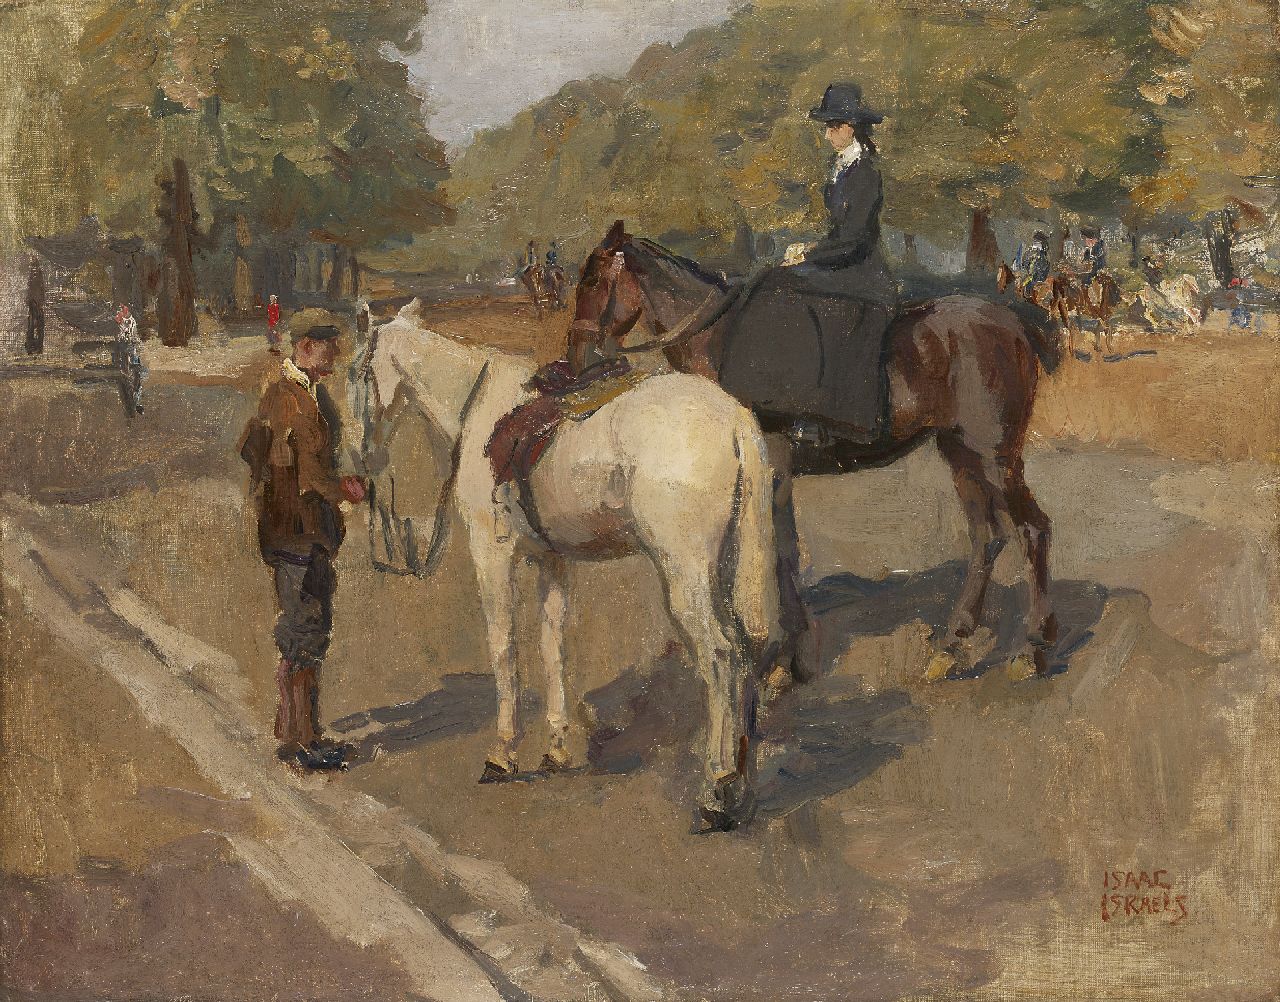 Israels I.L.  | 'Isaac' Lazarus Israels, A ride in Hyde Park, London, oil on canvas 70.2 x 89.2 cm, signed l.r.